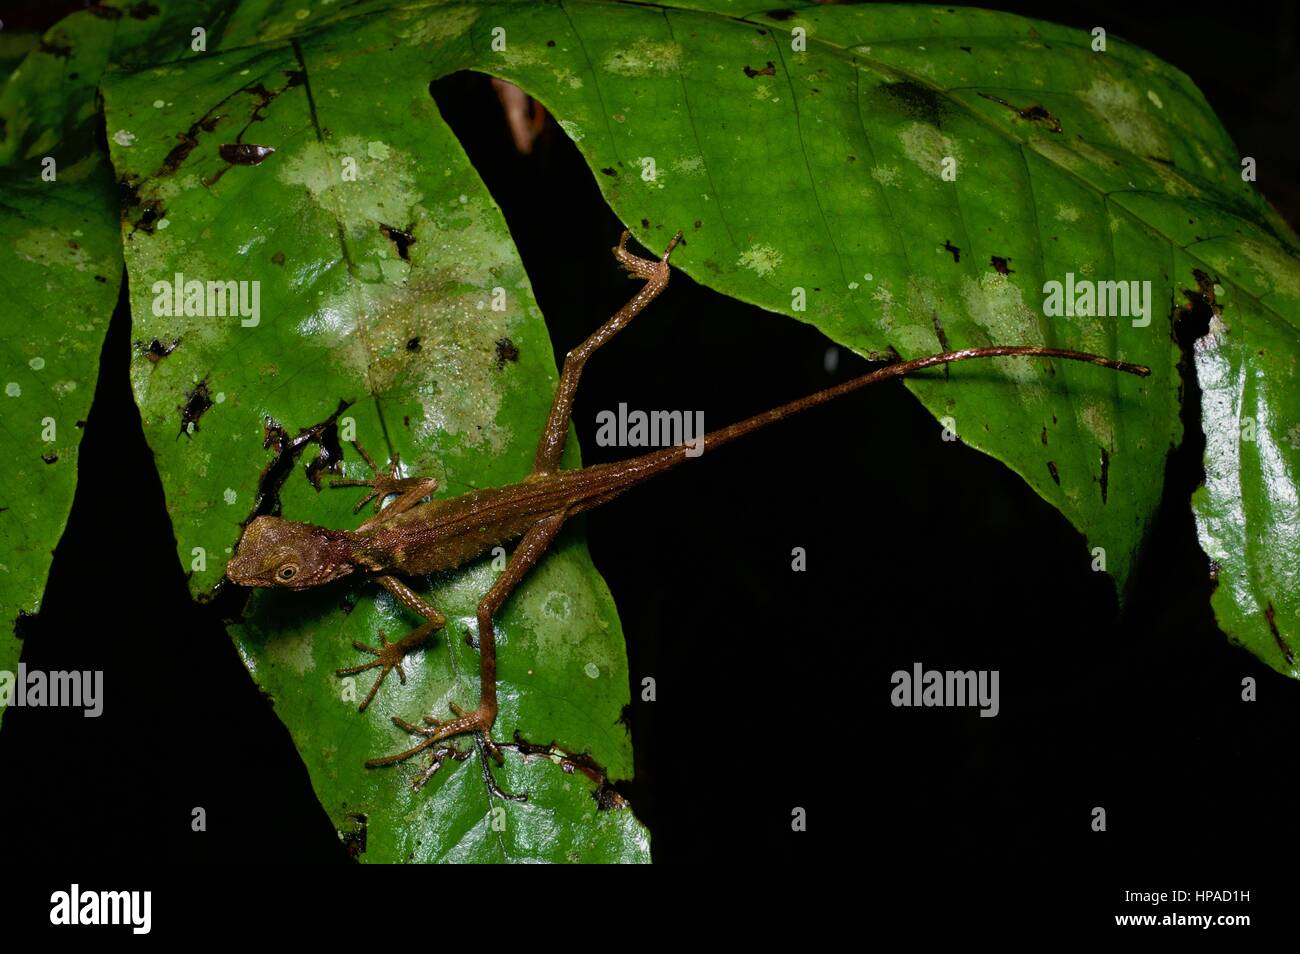 A Dusky Earless Agama (Aphaniotis fusca) straddling a leaf in the Malaysian rainforest at night Stock Photo